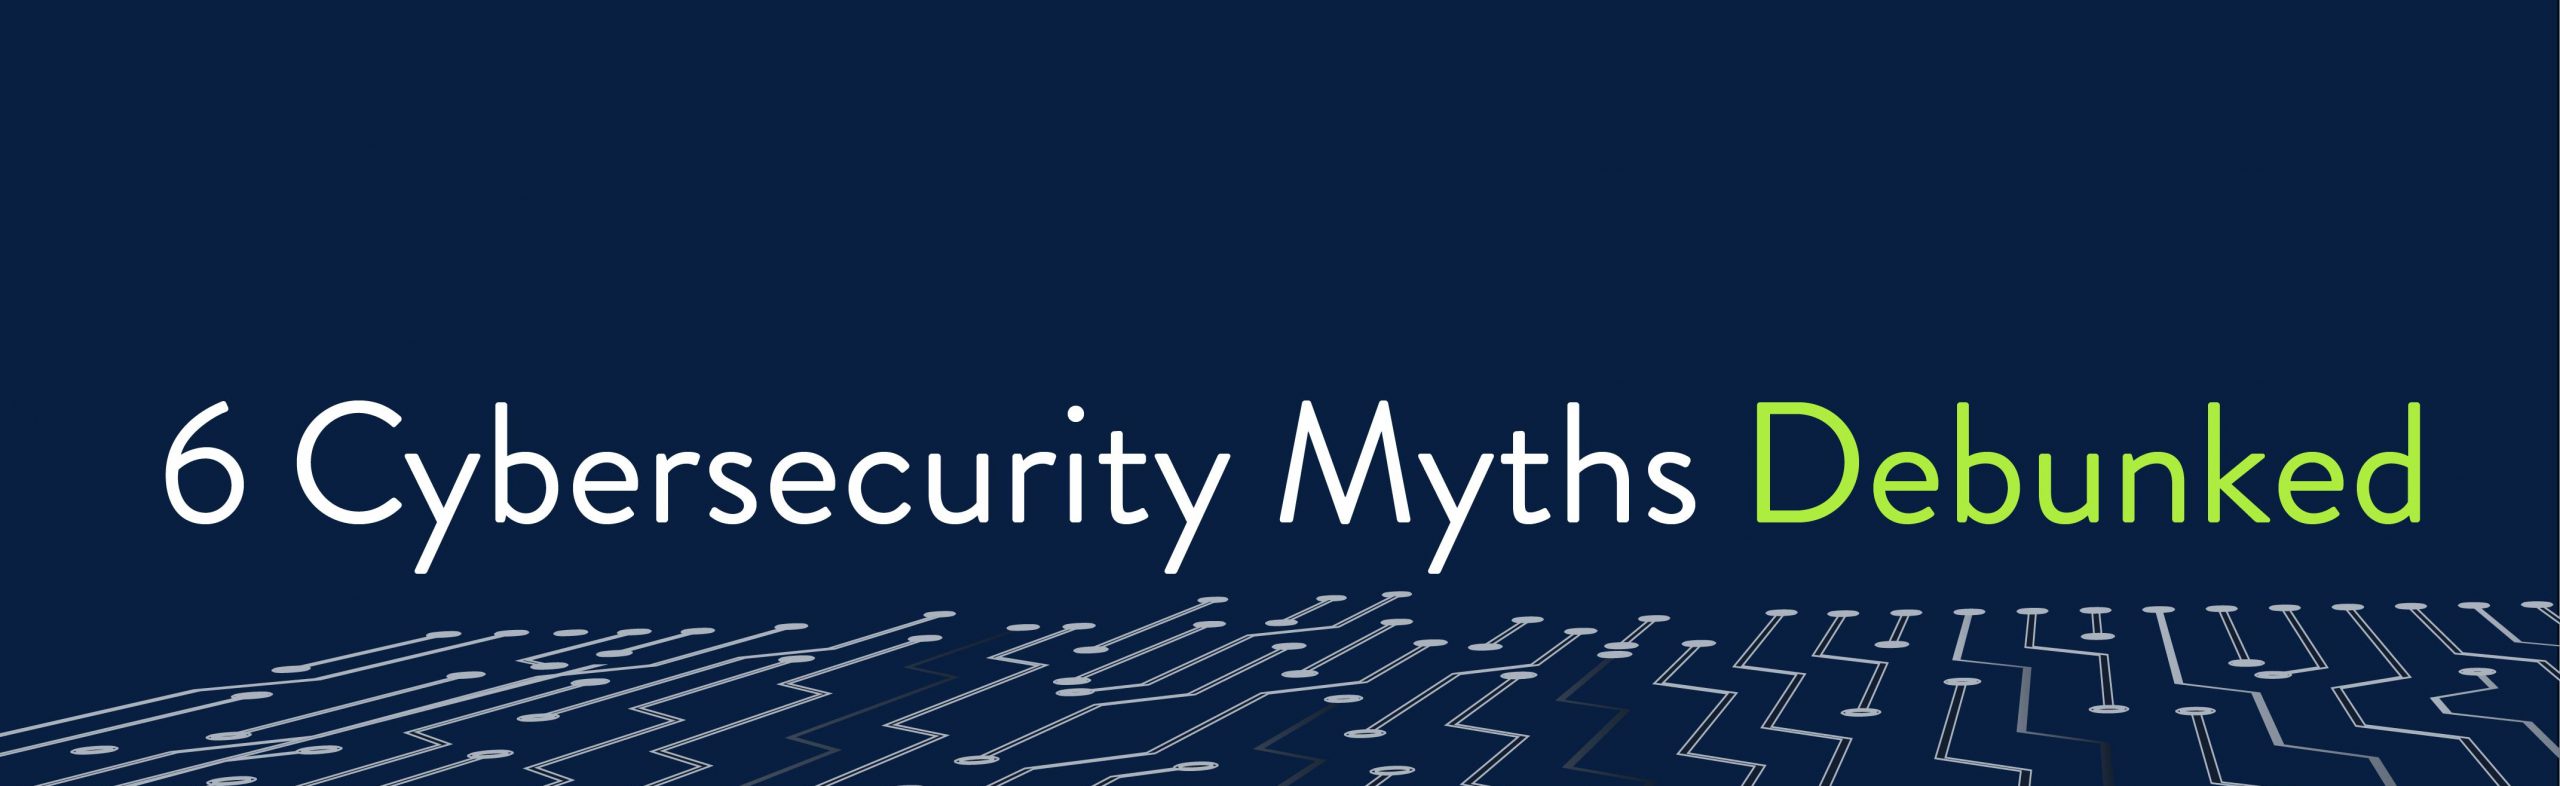 Cyber Security Myth Debunked – Work From Home Does Not Require Internal Network Vulnerability Assessment